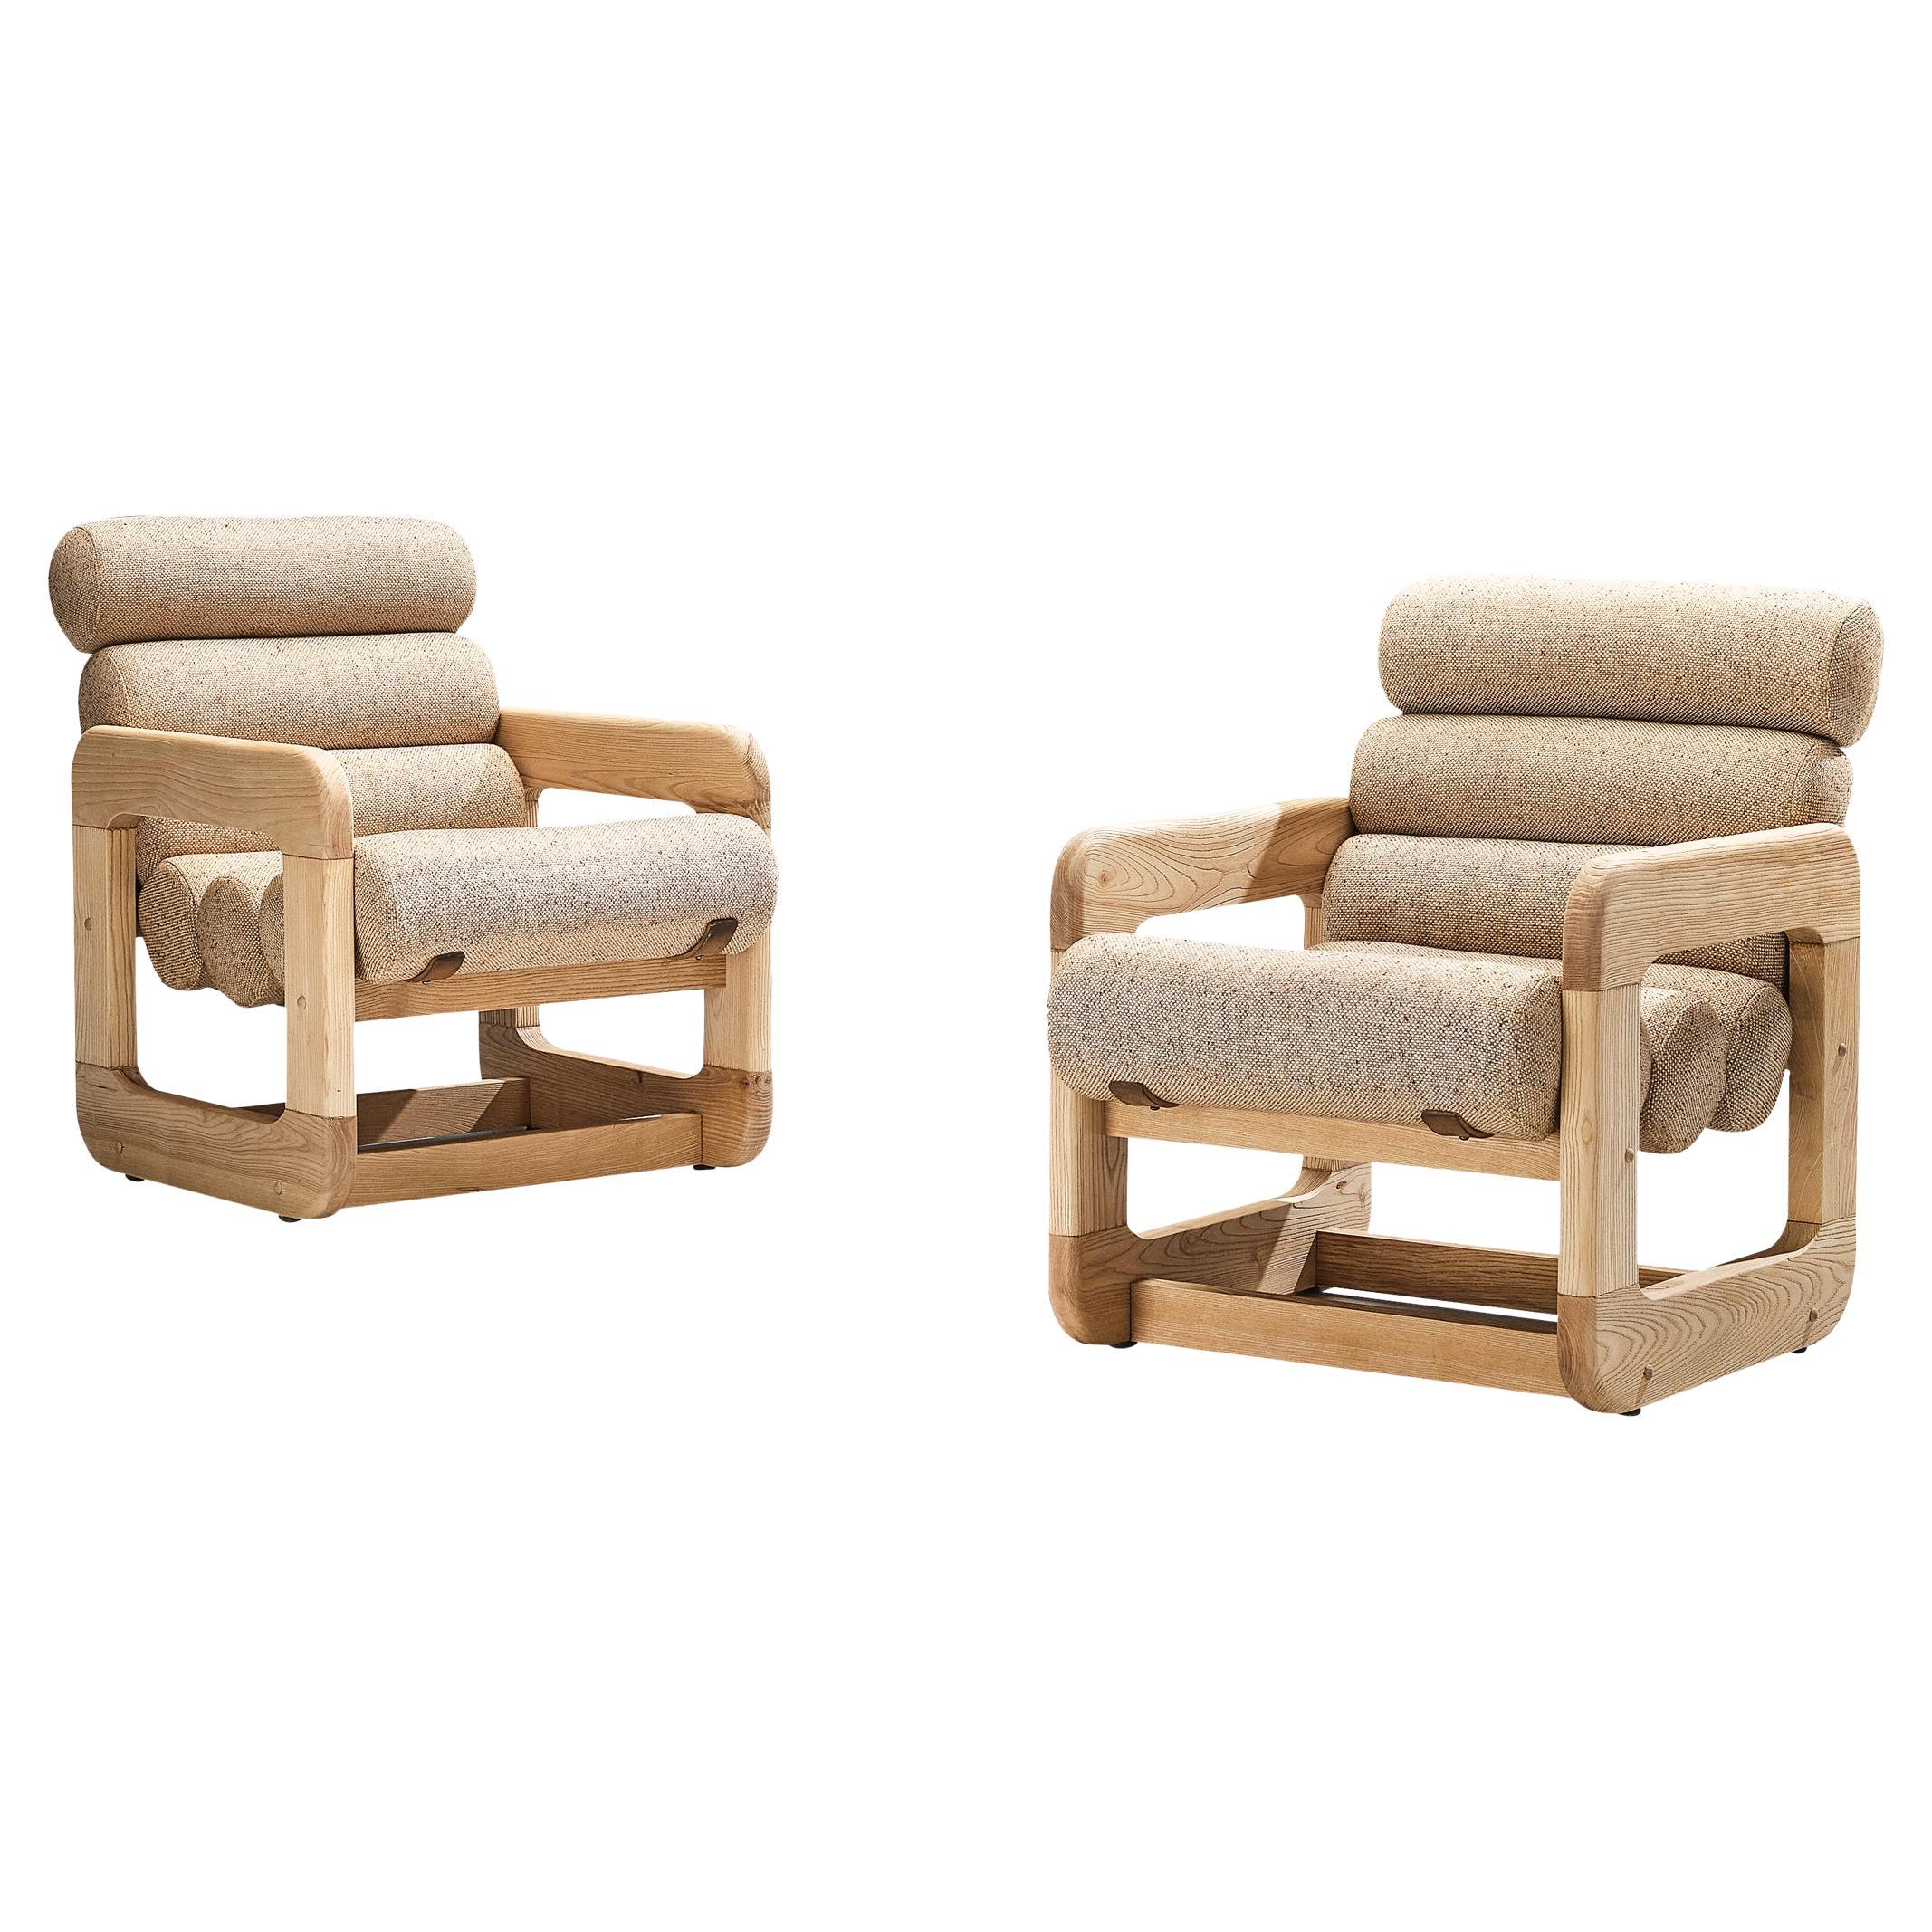 Pair of Extraordinary Lounge Chairs in Ash and Beige Upholstery For Sale